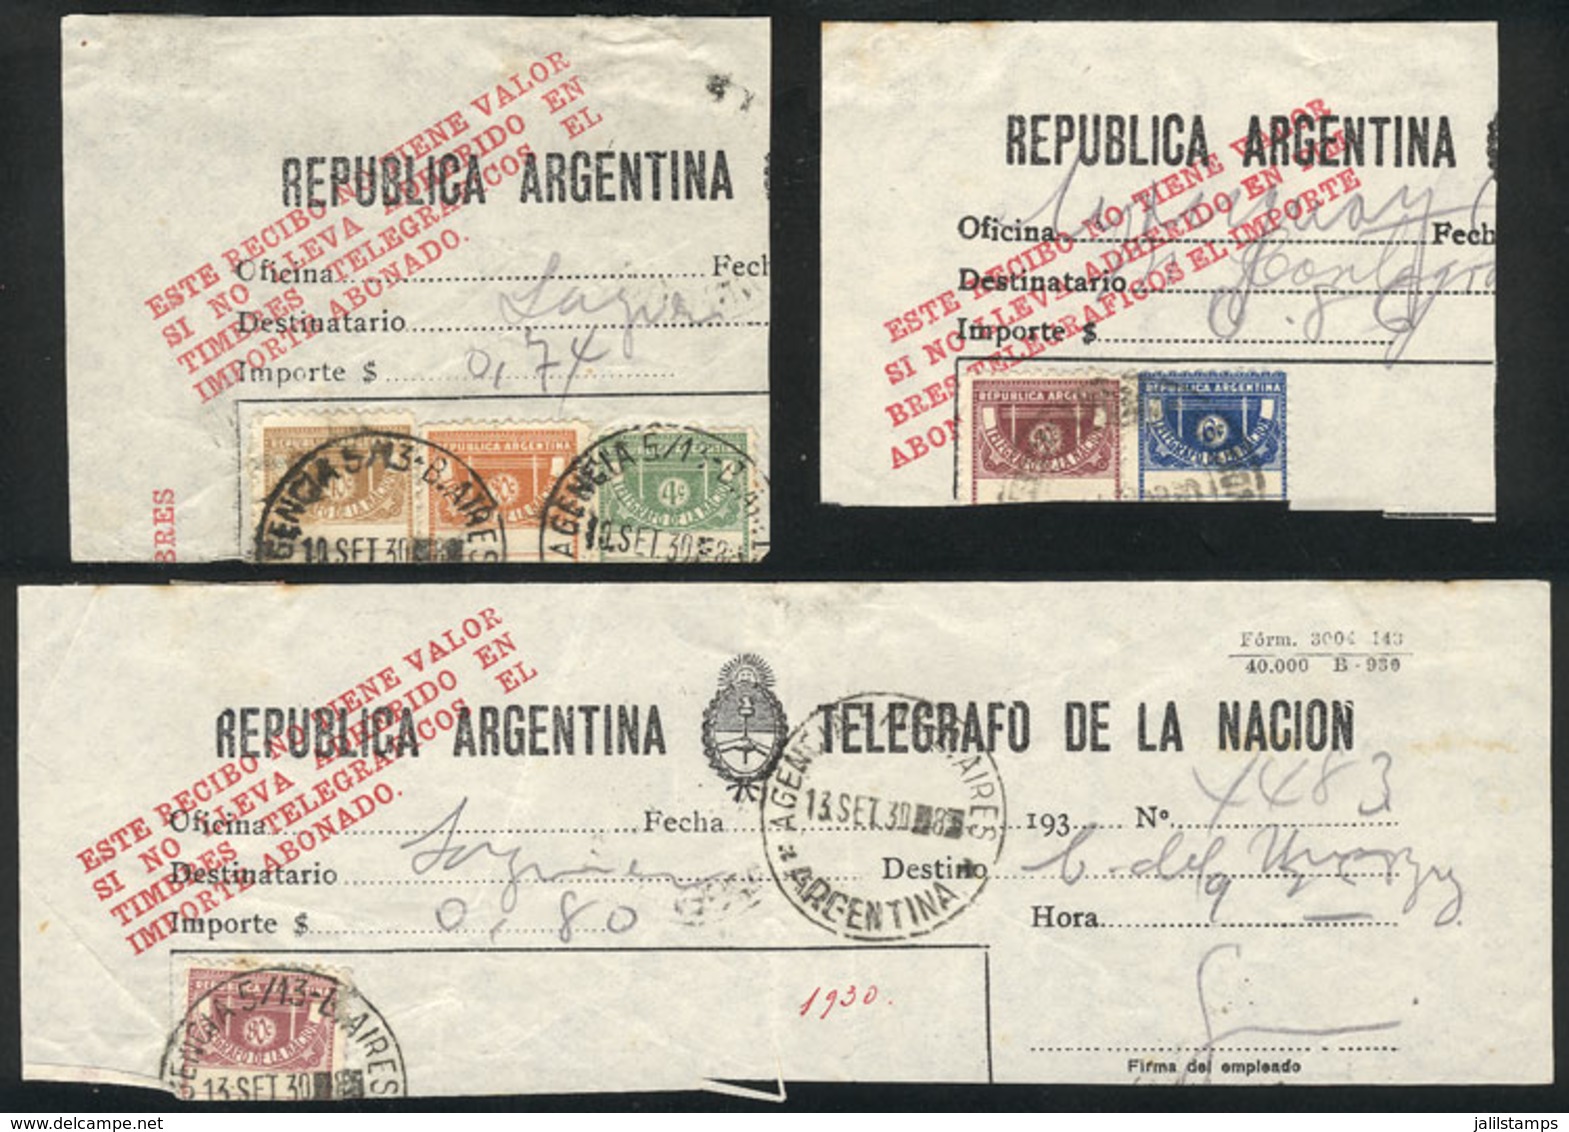 ARGENTINA: 3 Fragments Of Telegram Receipts Of The Year 1930, With Affixed Stamps (the Part Corresponding To The Client) - Telegraph